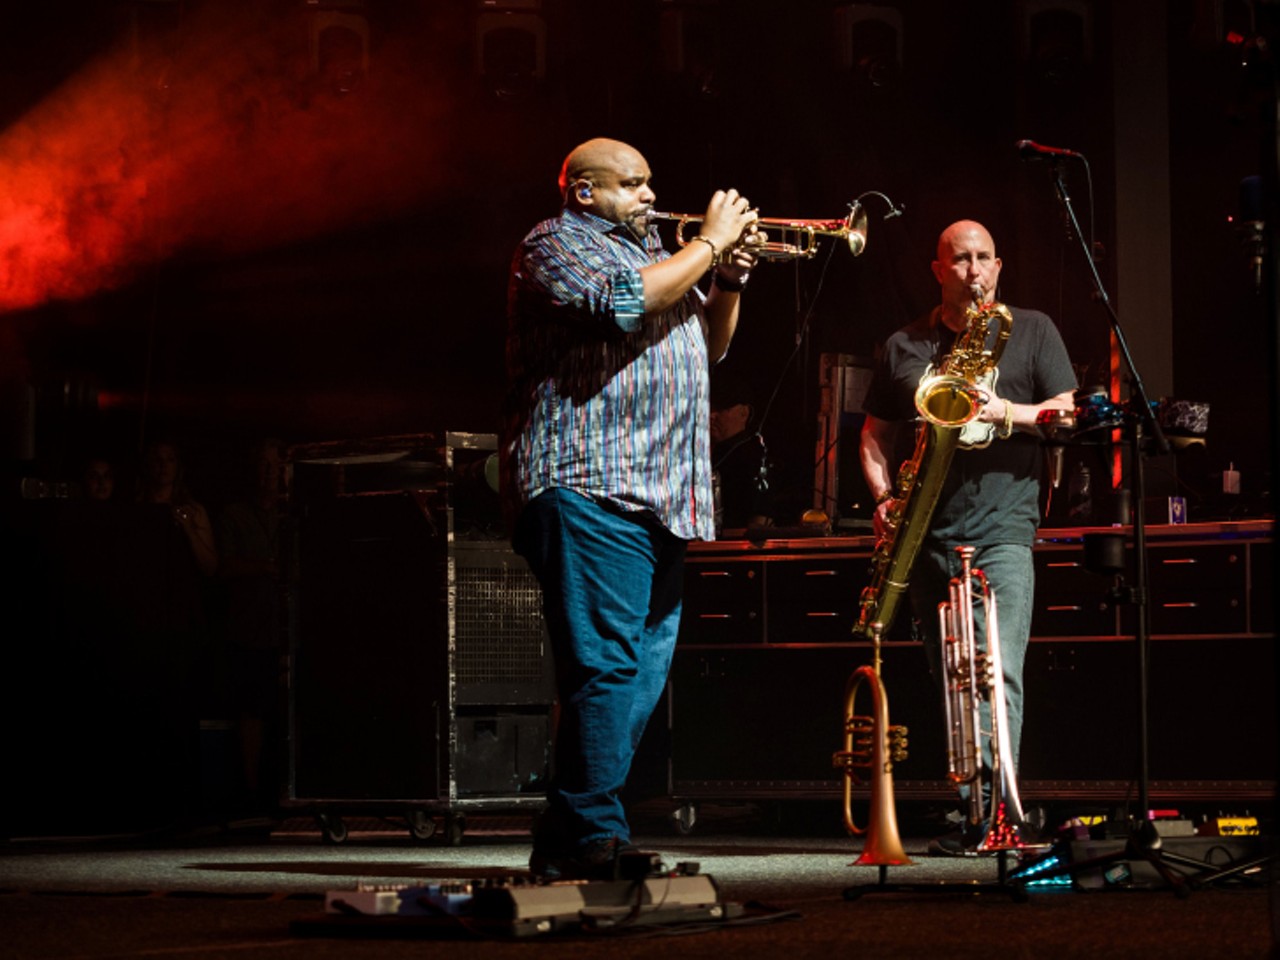 Everything we saw at the Dave Matthews Band show at DTE Energy Music Theatre